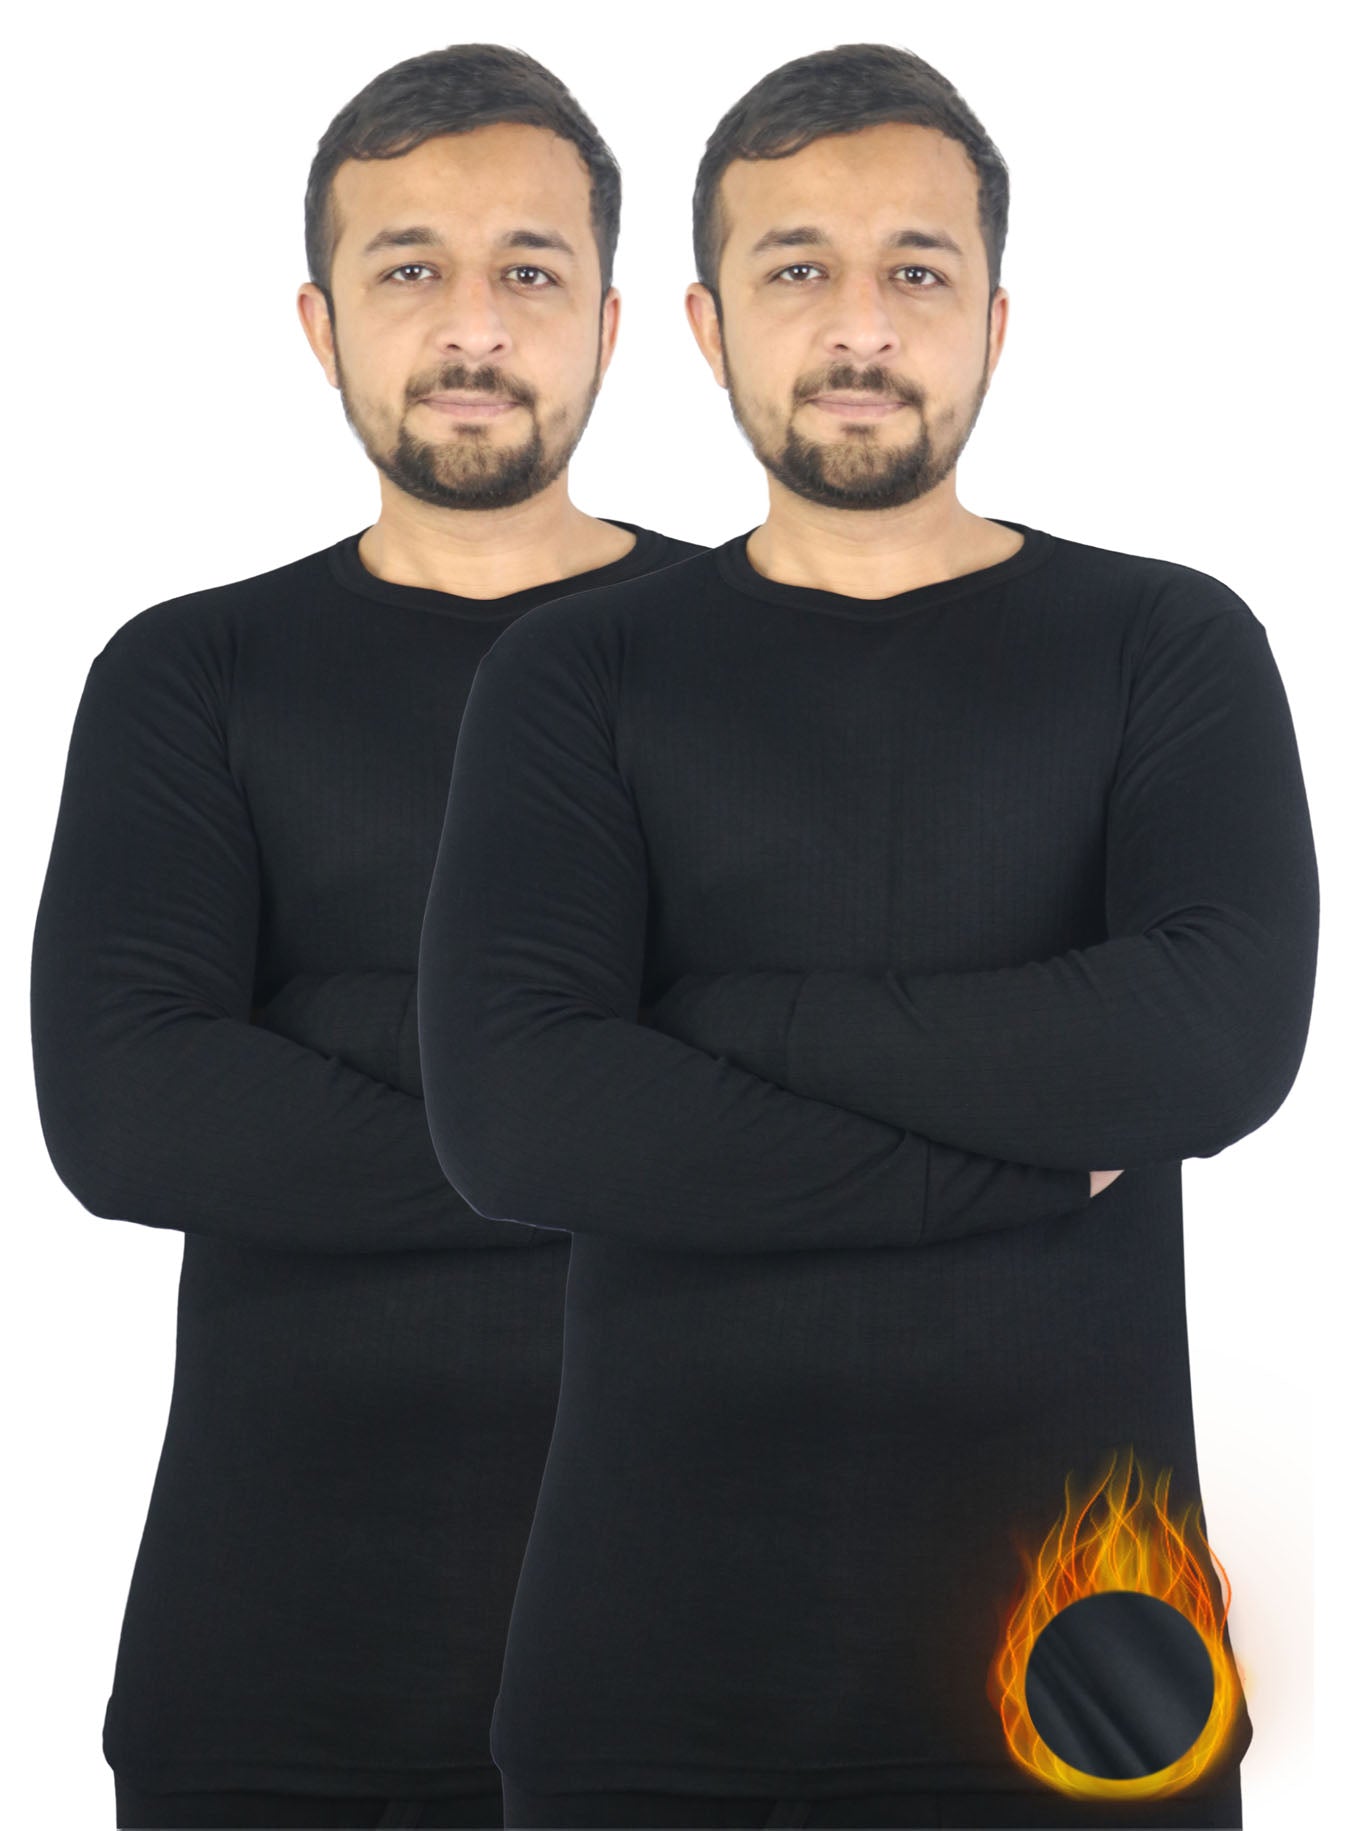 Bahob® Pack of 2 Men's Thermal Long Sleeve Half Sleeve Top , Warm Underwear  Lightweight Ultra Soft Thermal Top S-XXL. - Bahob